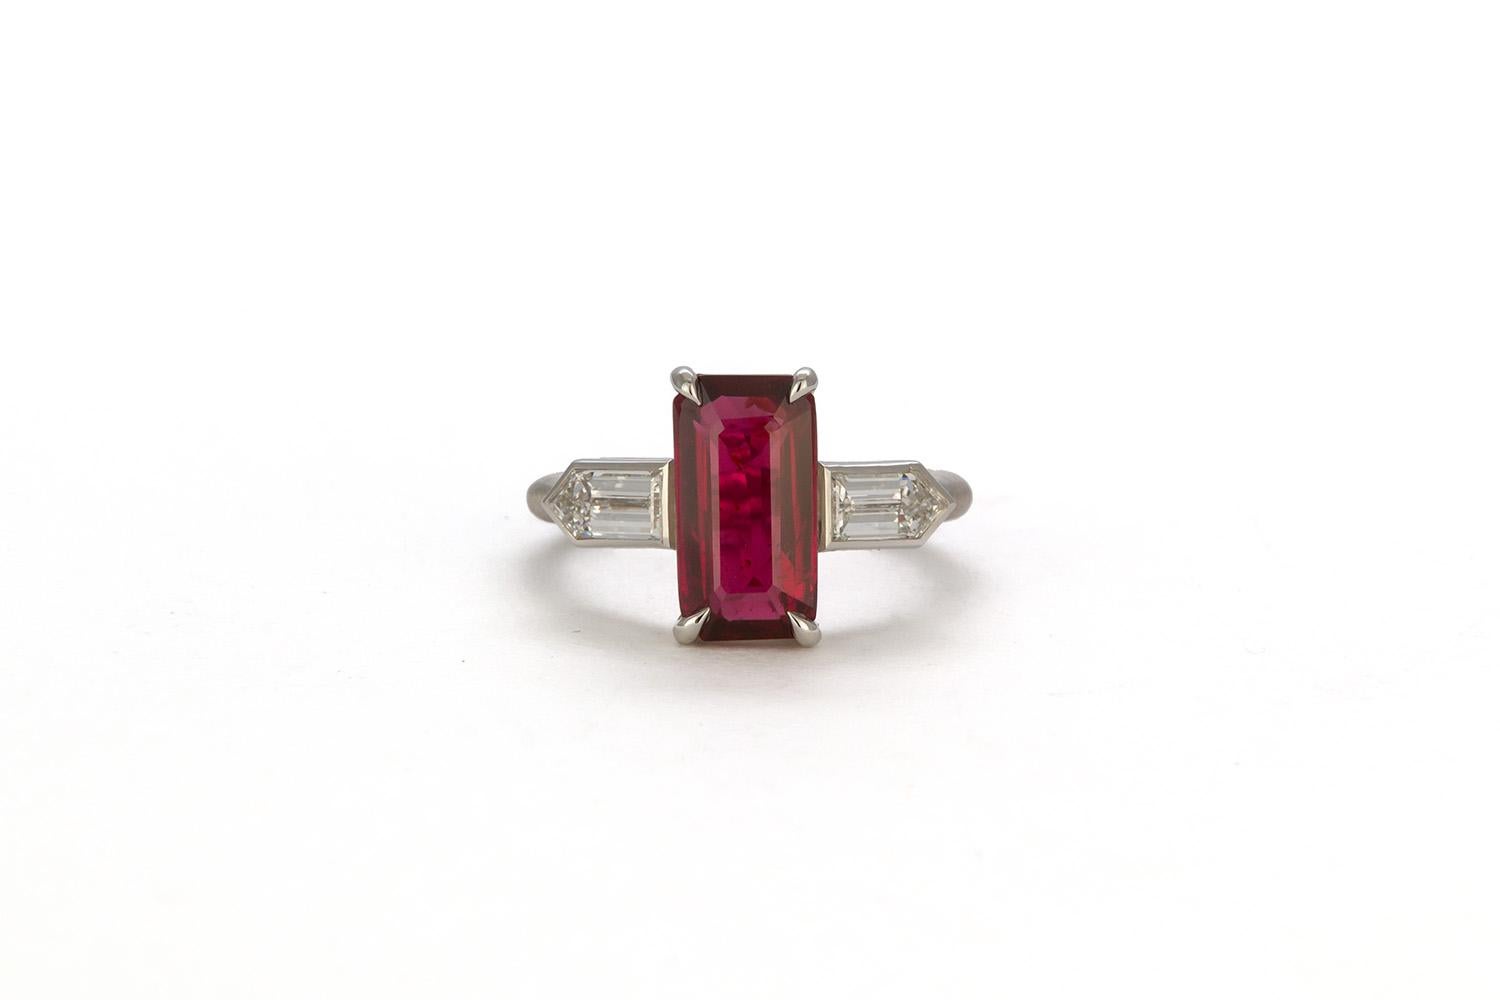 We are pleased to offer this GRS Certified Platinum Ruby & Diamond Ring. This stunning ring is a brand new vintage recreation and feature a GRS Certified vivid red pigeon's blood 4.00ct emerald cut natural ruby from Mozambique accented by 0.98ctw